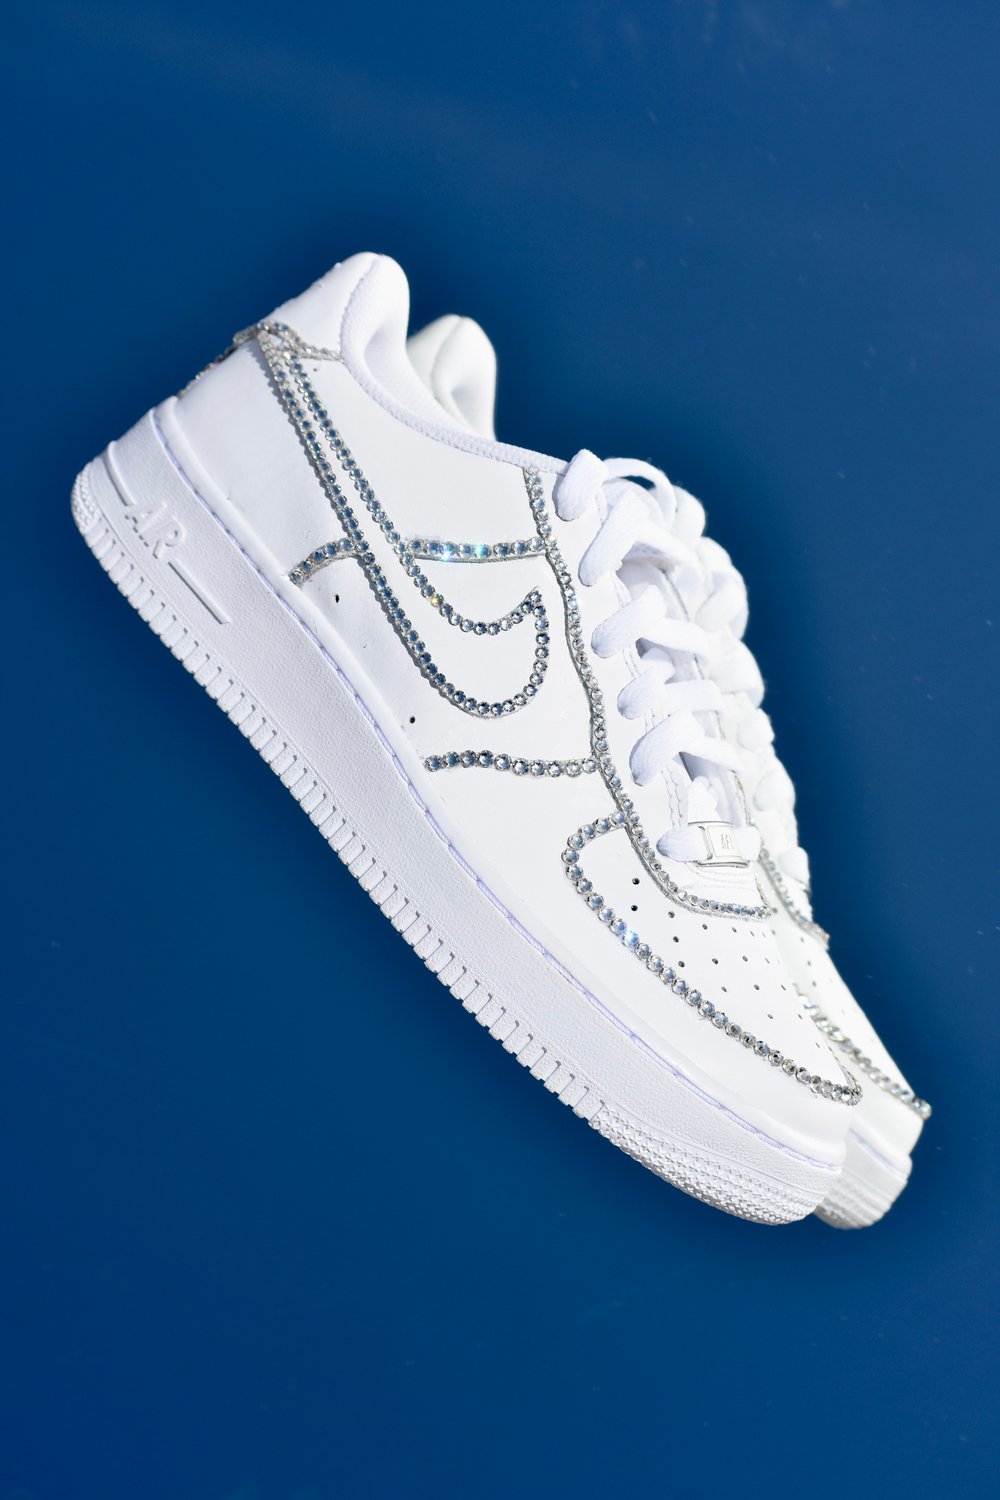 Dripping Blue Custom Air Force 1 Sneakers with Butterflies. Low, Mid & High Top Low / 13 M / 14.5 W